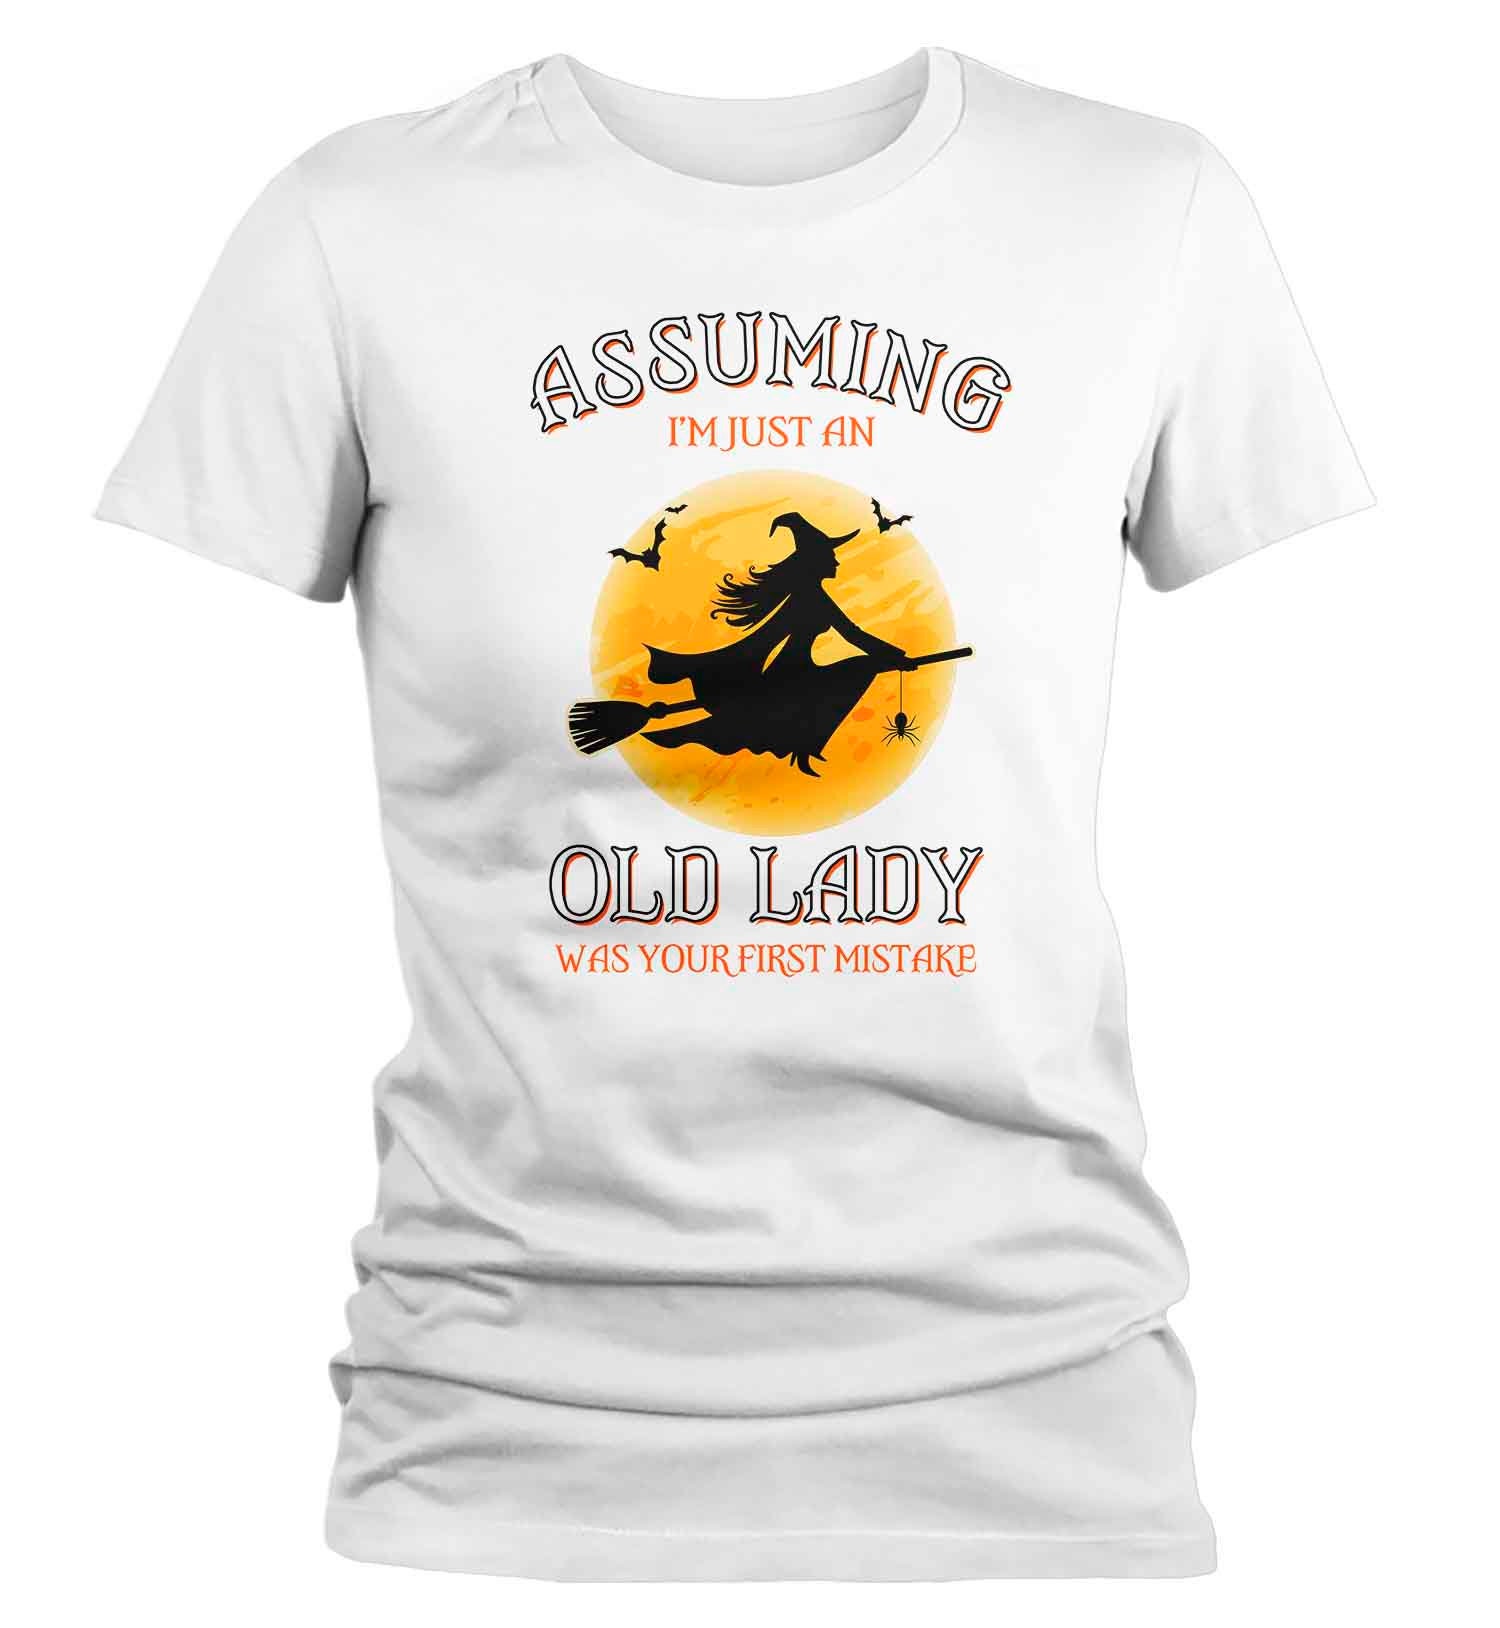 I'll perhaps try to make more silly Halloween shirts as it comes close